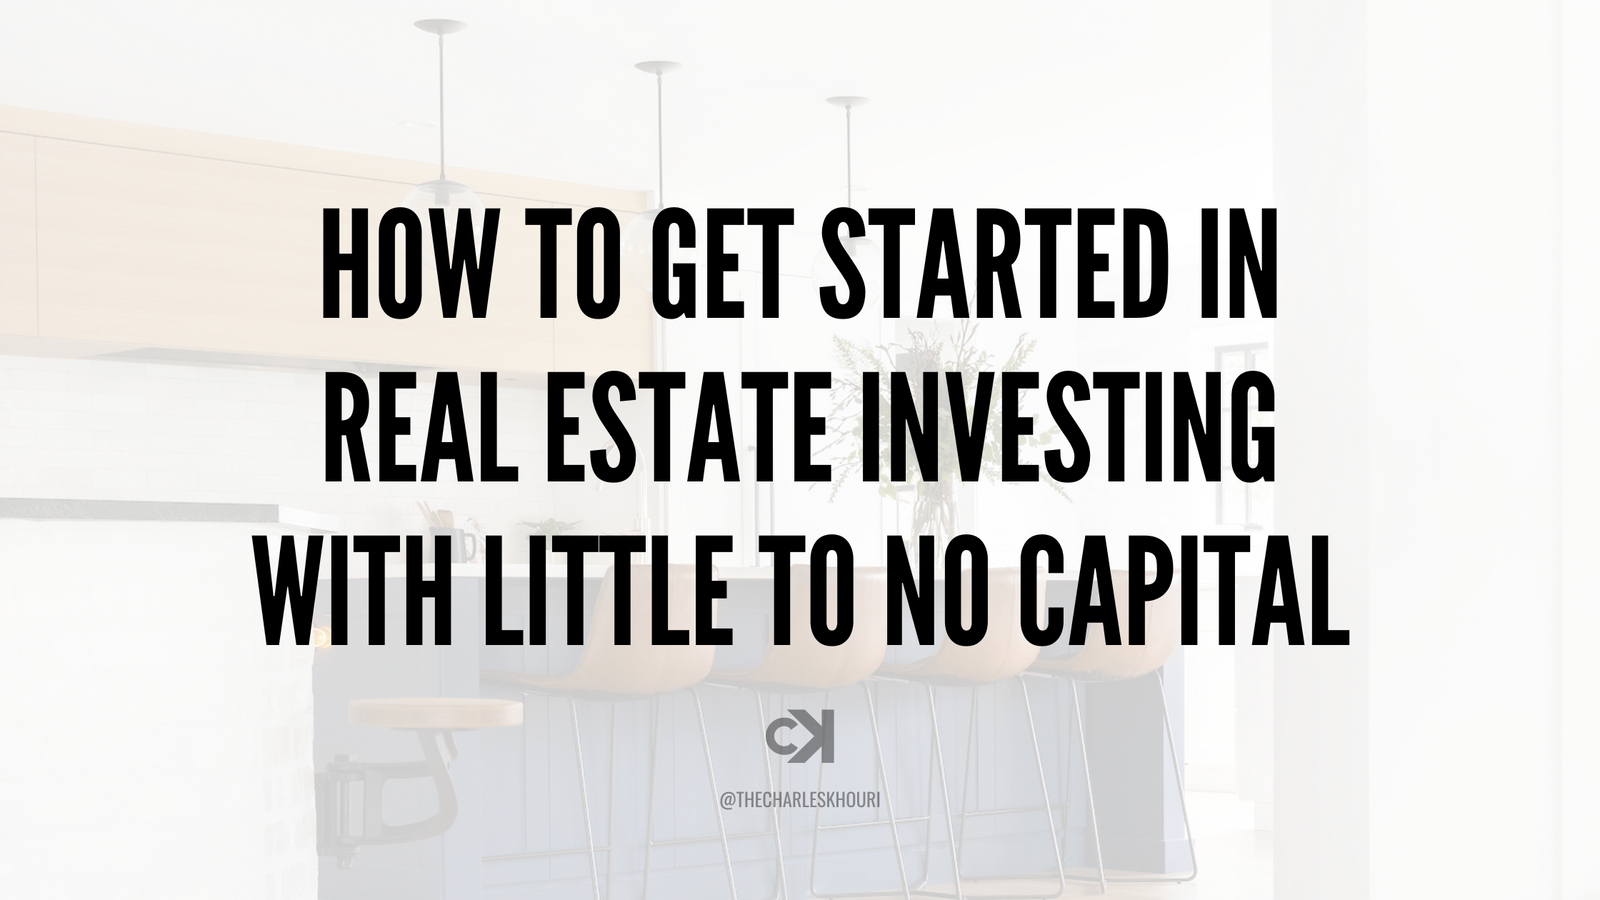 How to Get Started in Real Estate Investing with Little to No Capital